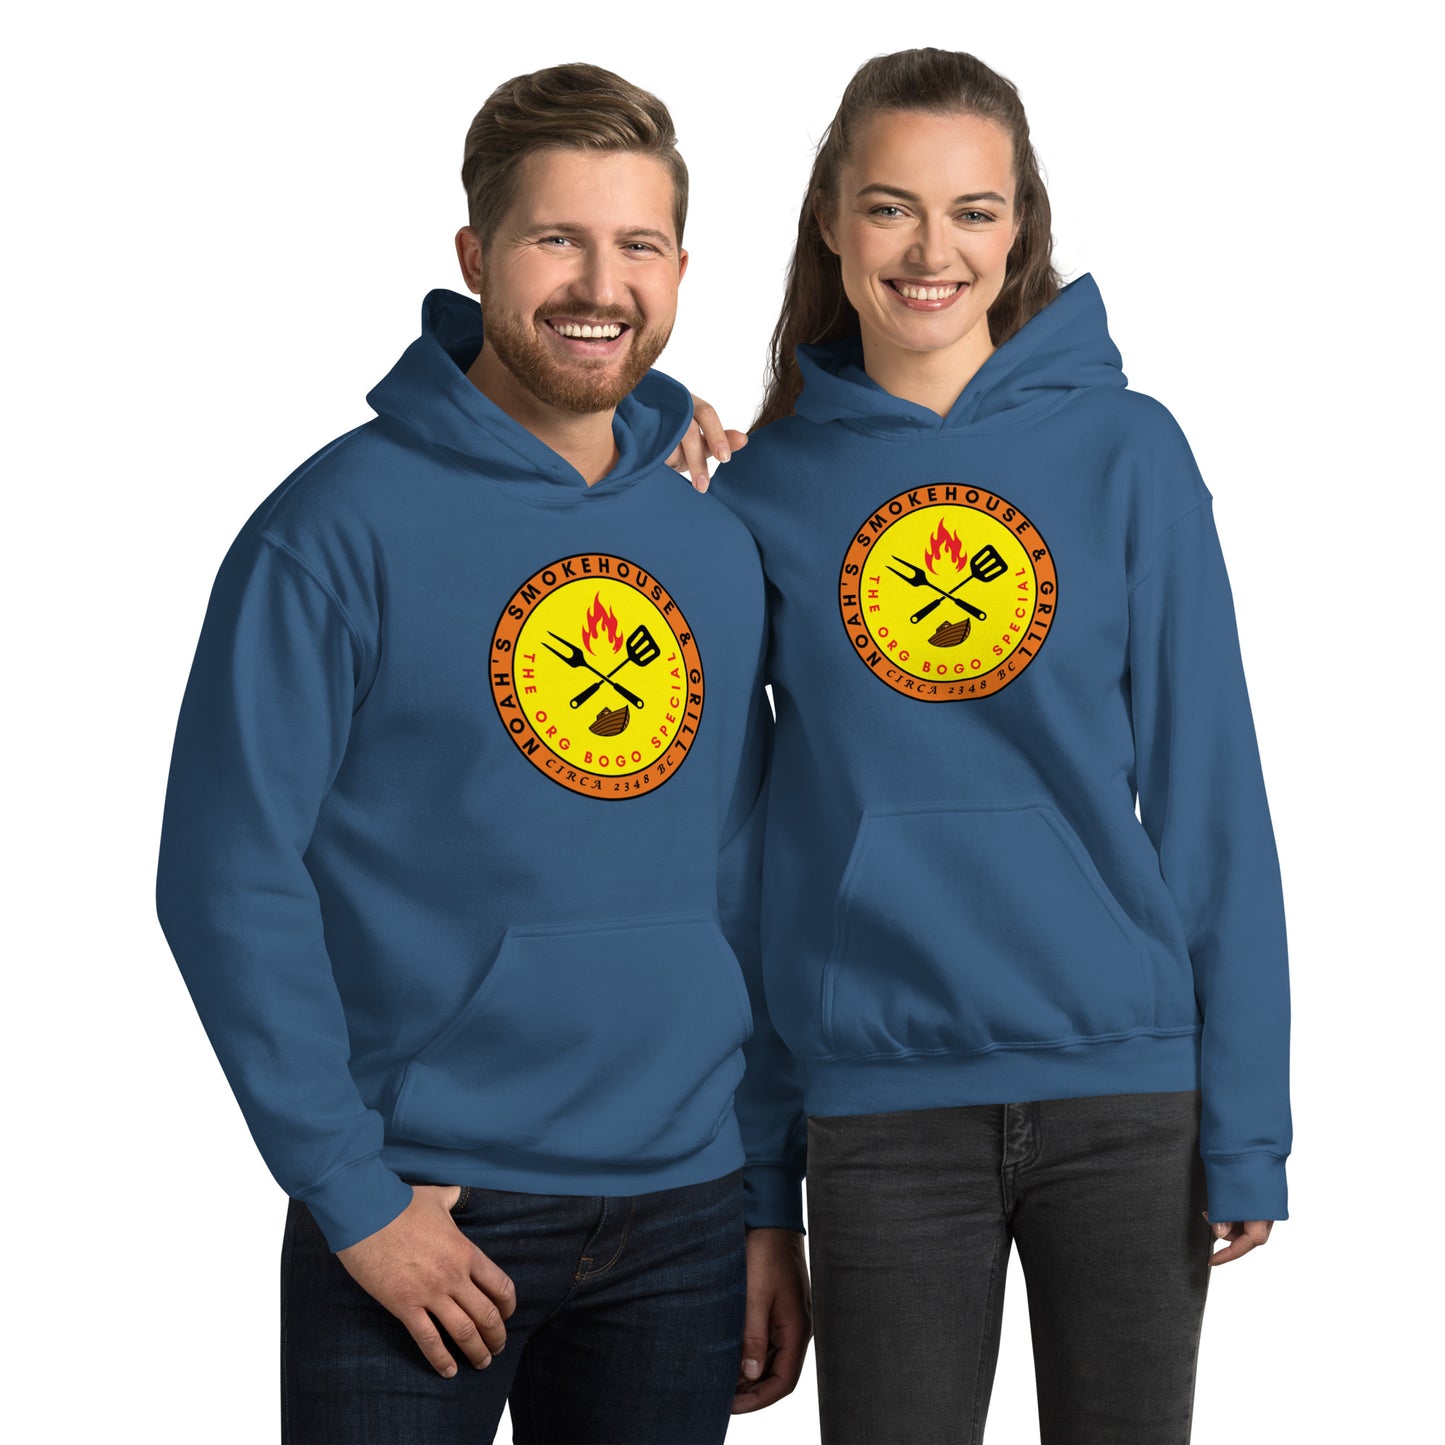 Noah's Smokehouse & Grill - The Org BOGO Special Circa 2348 BC Unisex Hoodie